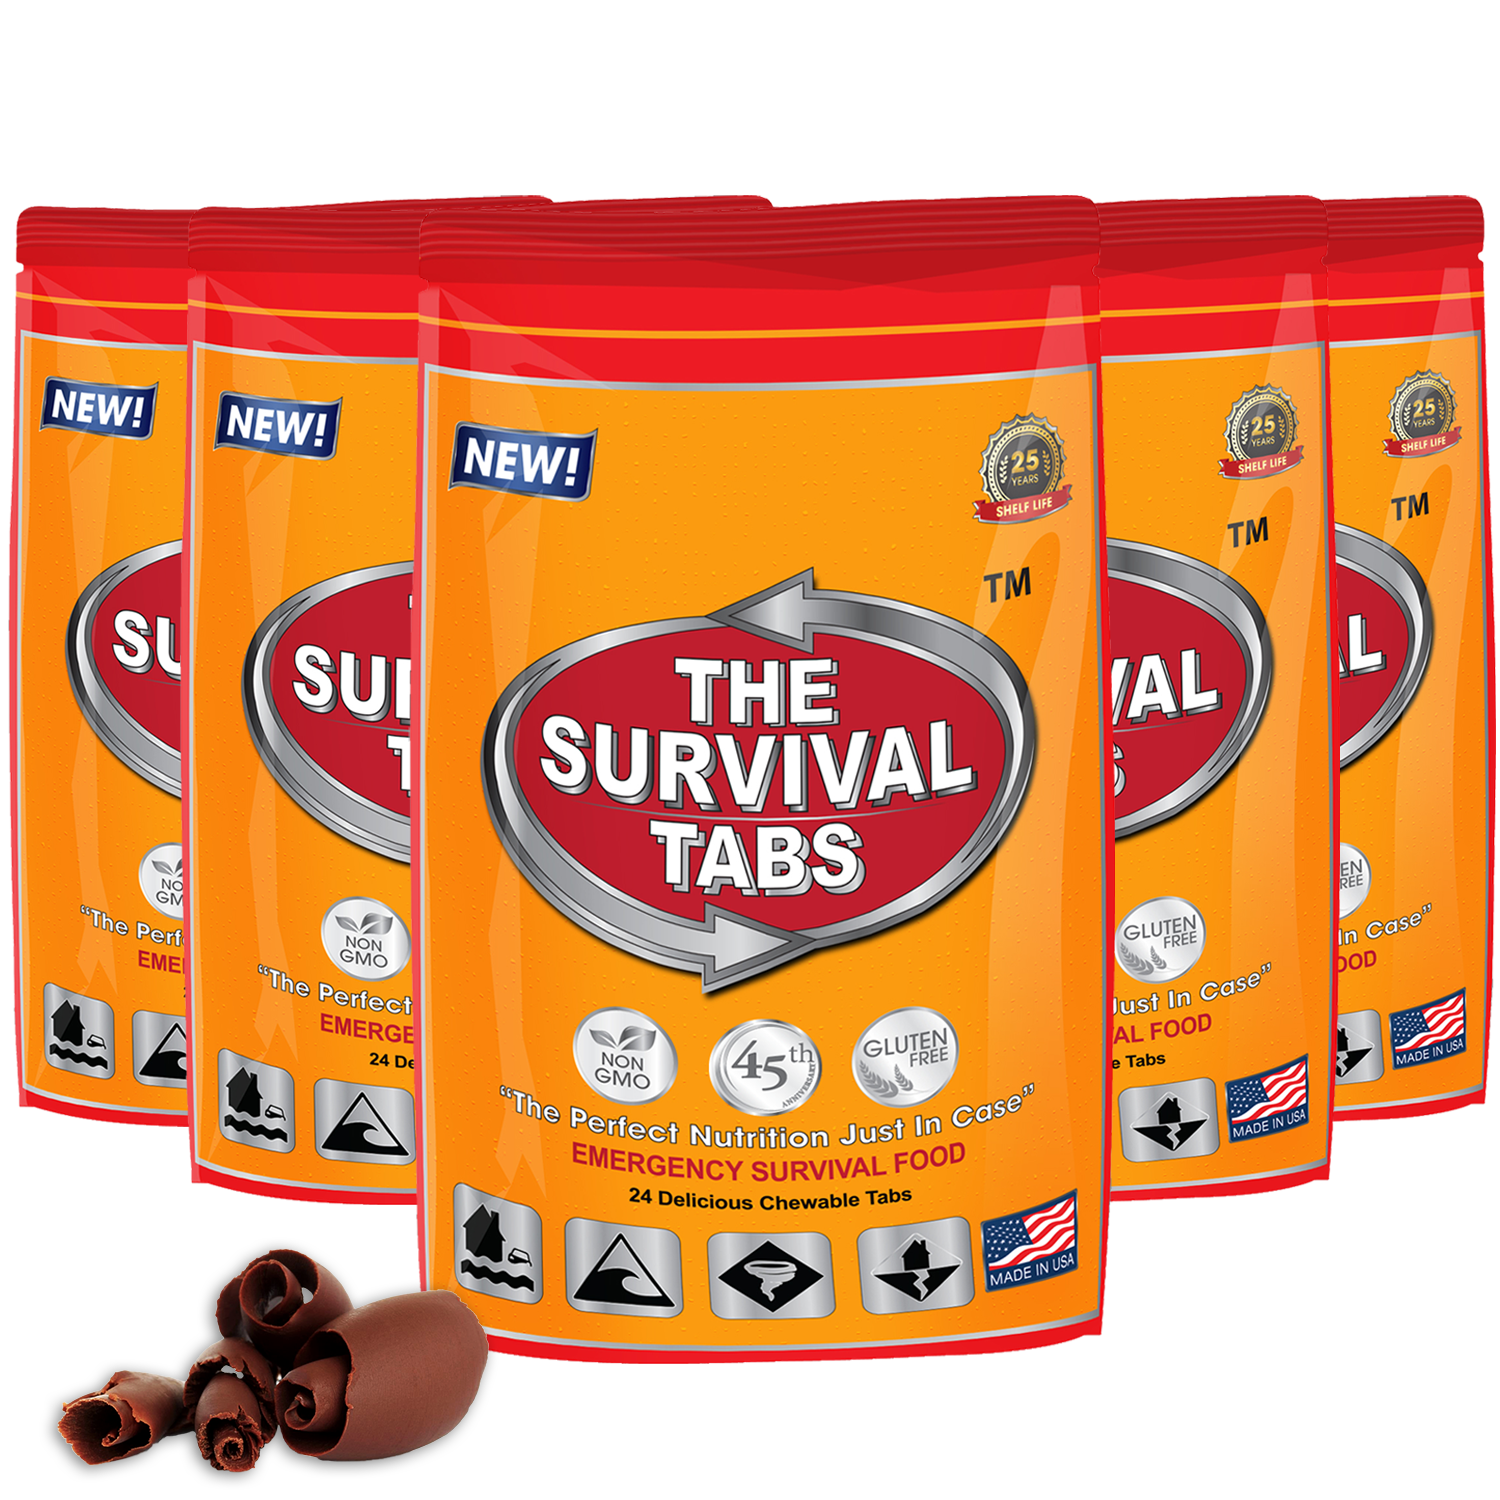 Survival Tabs - 10 Days Food Supply - Chocolate Gluten Free and Non-GMO emergency food supply